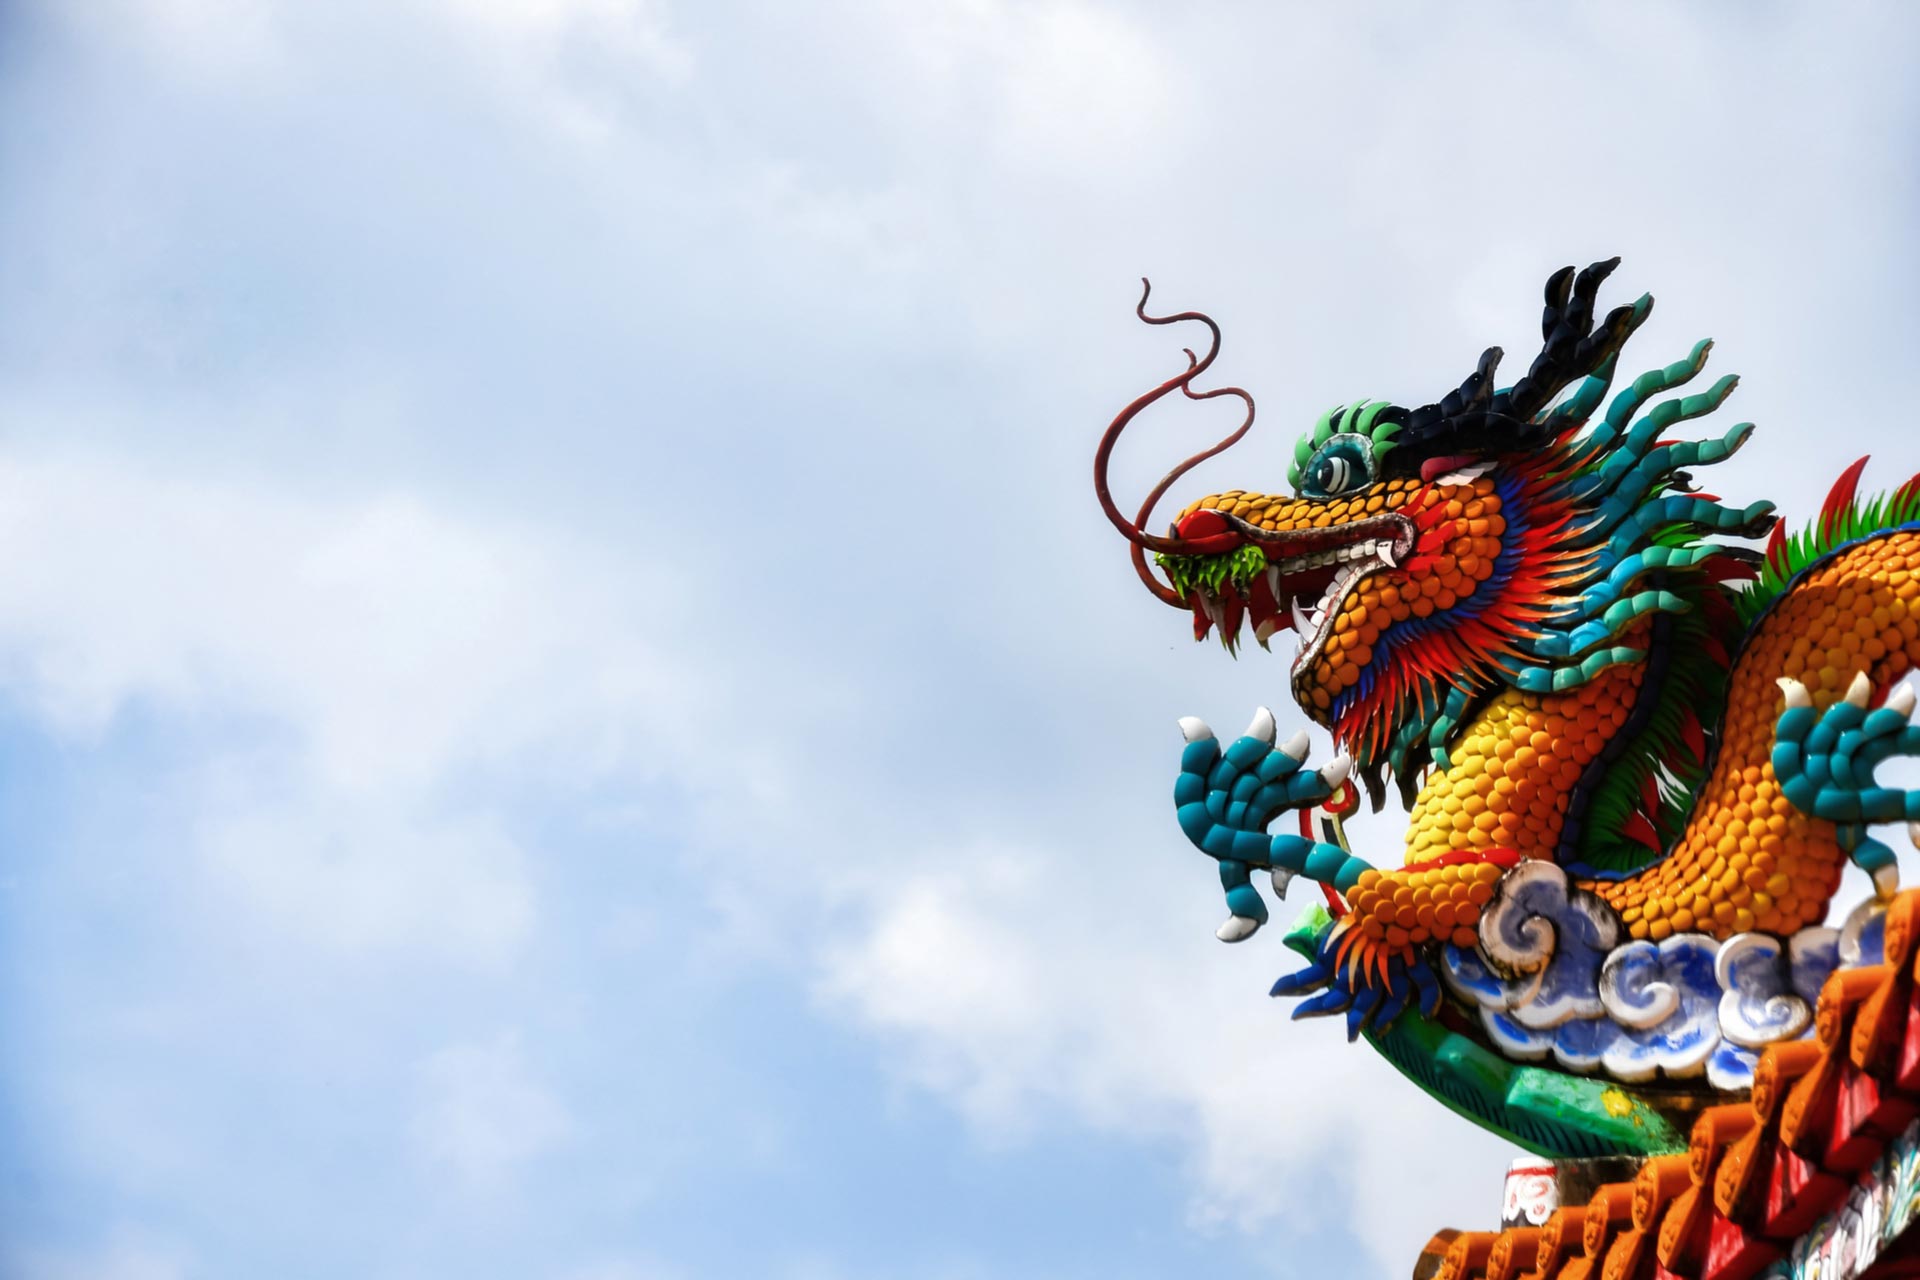 Macro Dragon: Welcome to WK # 41, China is out, VP Debate In, RBA, FOMC Mins, New Month, Final Quarter 